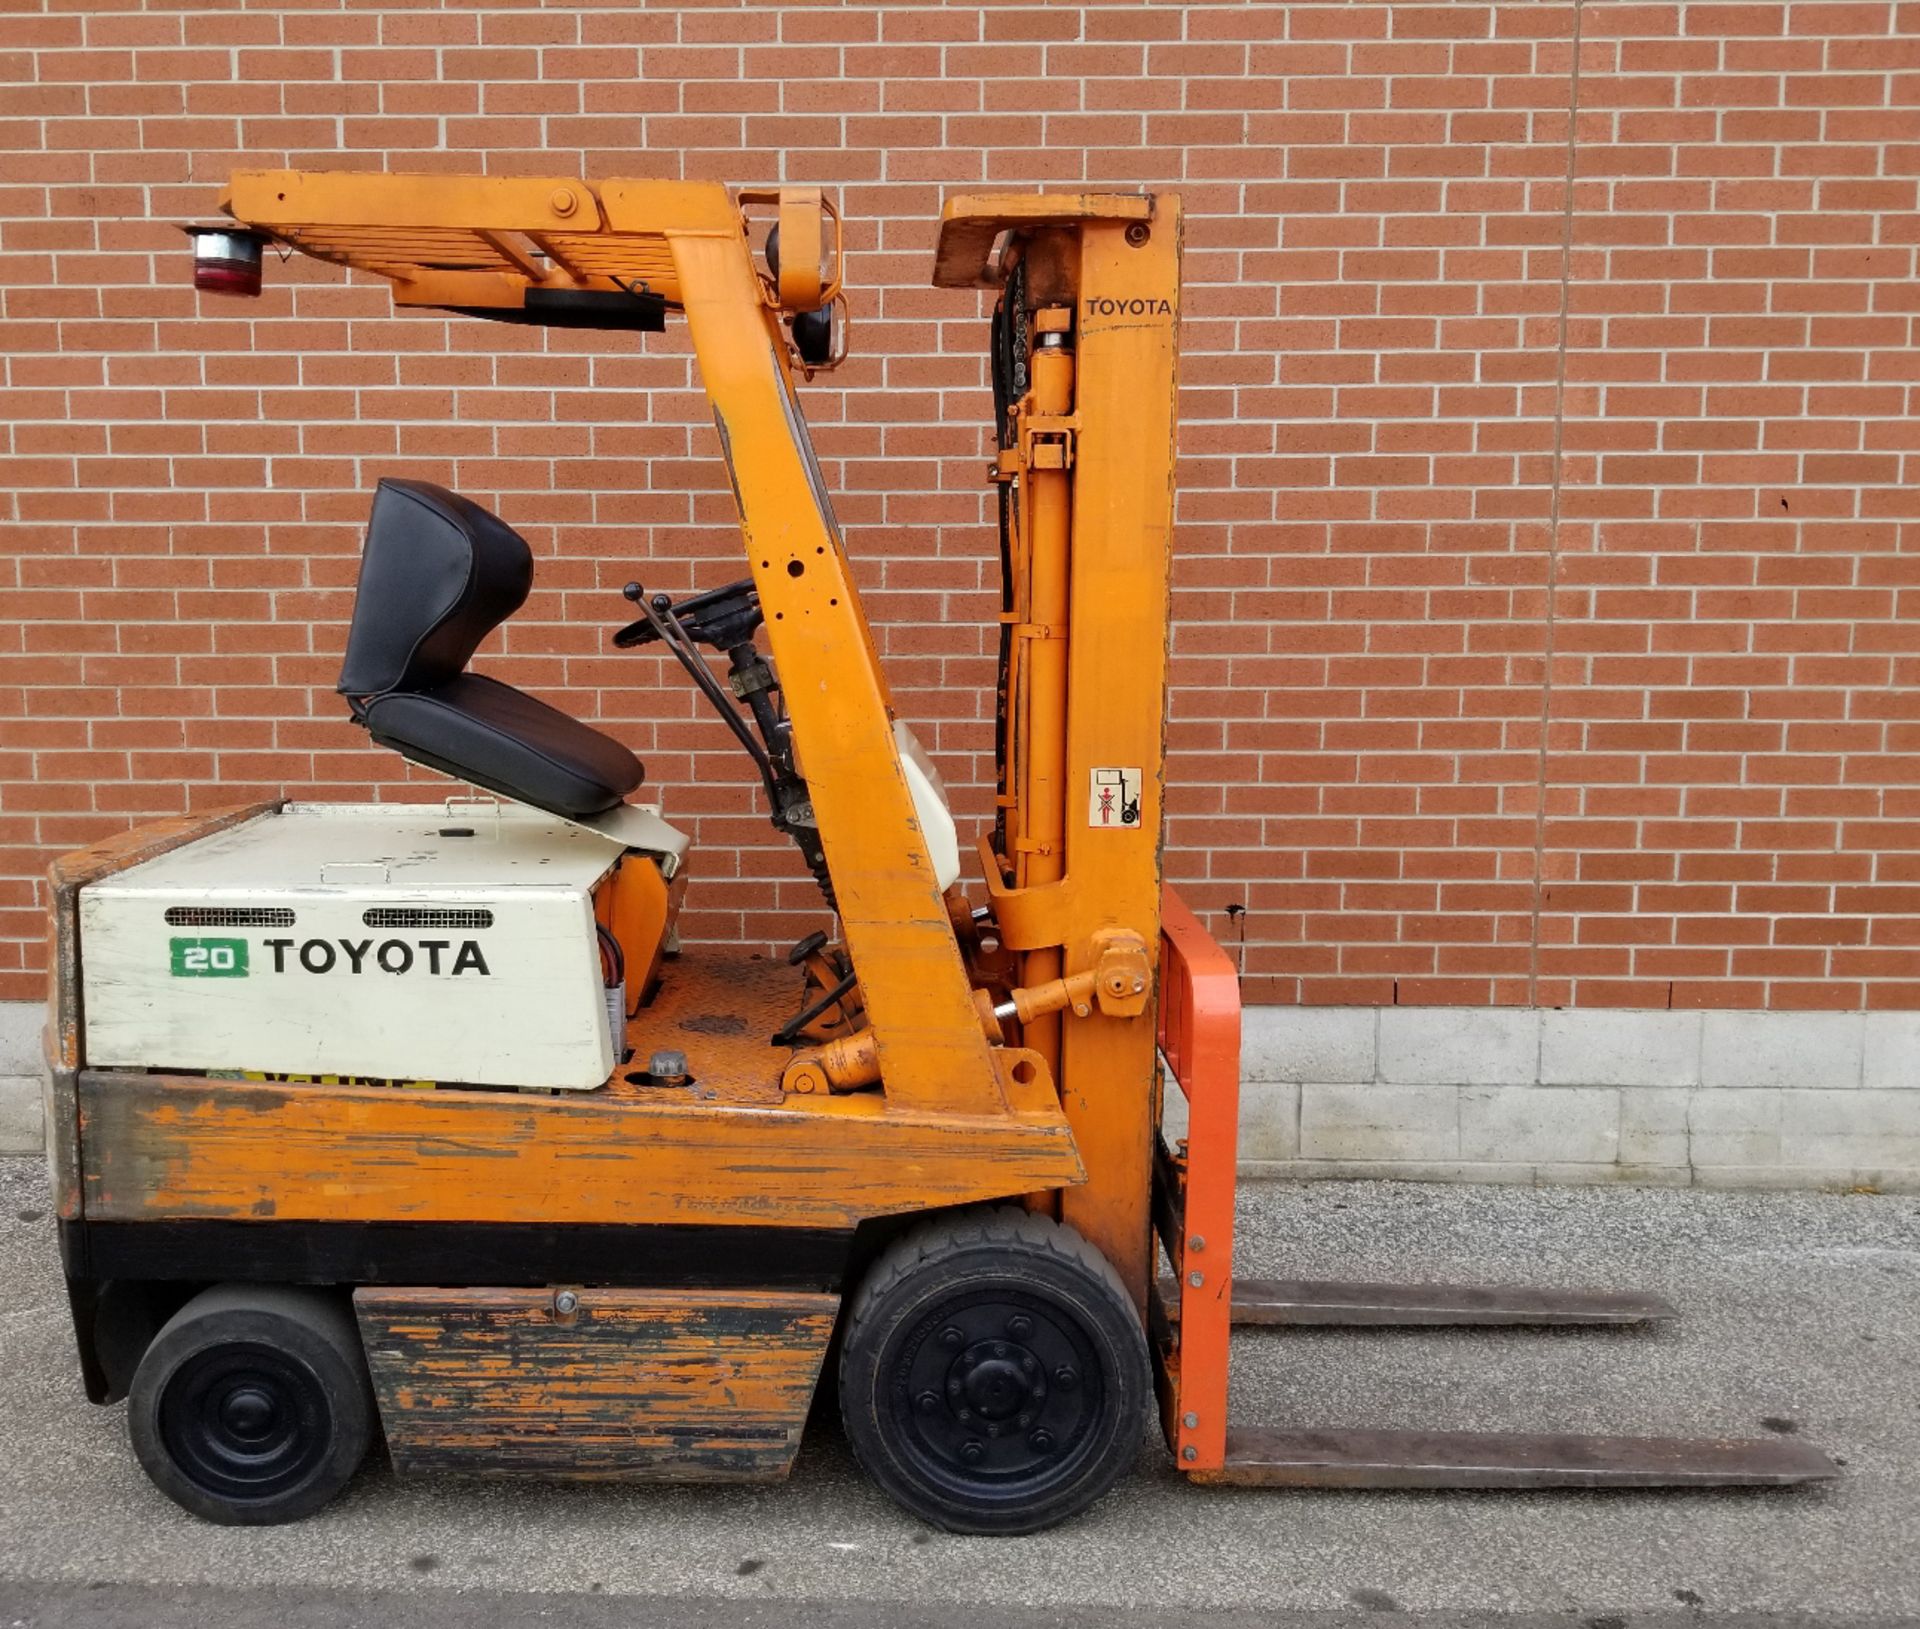 TOYOTA 2FBCA20 36V ELECTRIC FORKLIFT WITH 3480 LB. CAPACITY, APPROX. 130" MAX. VERTICAL LIFT, 2